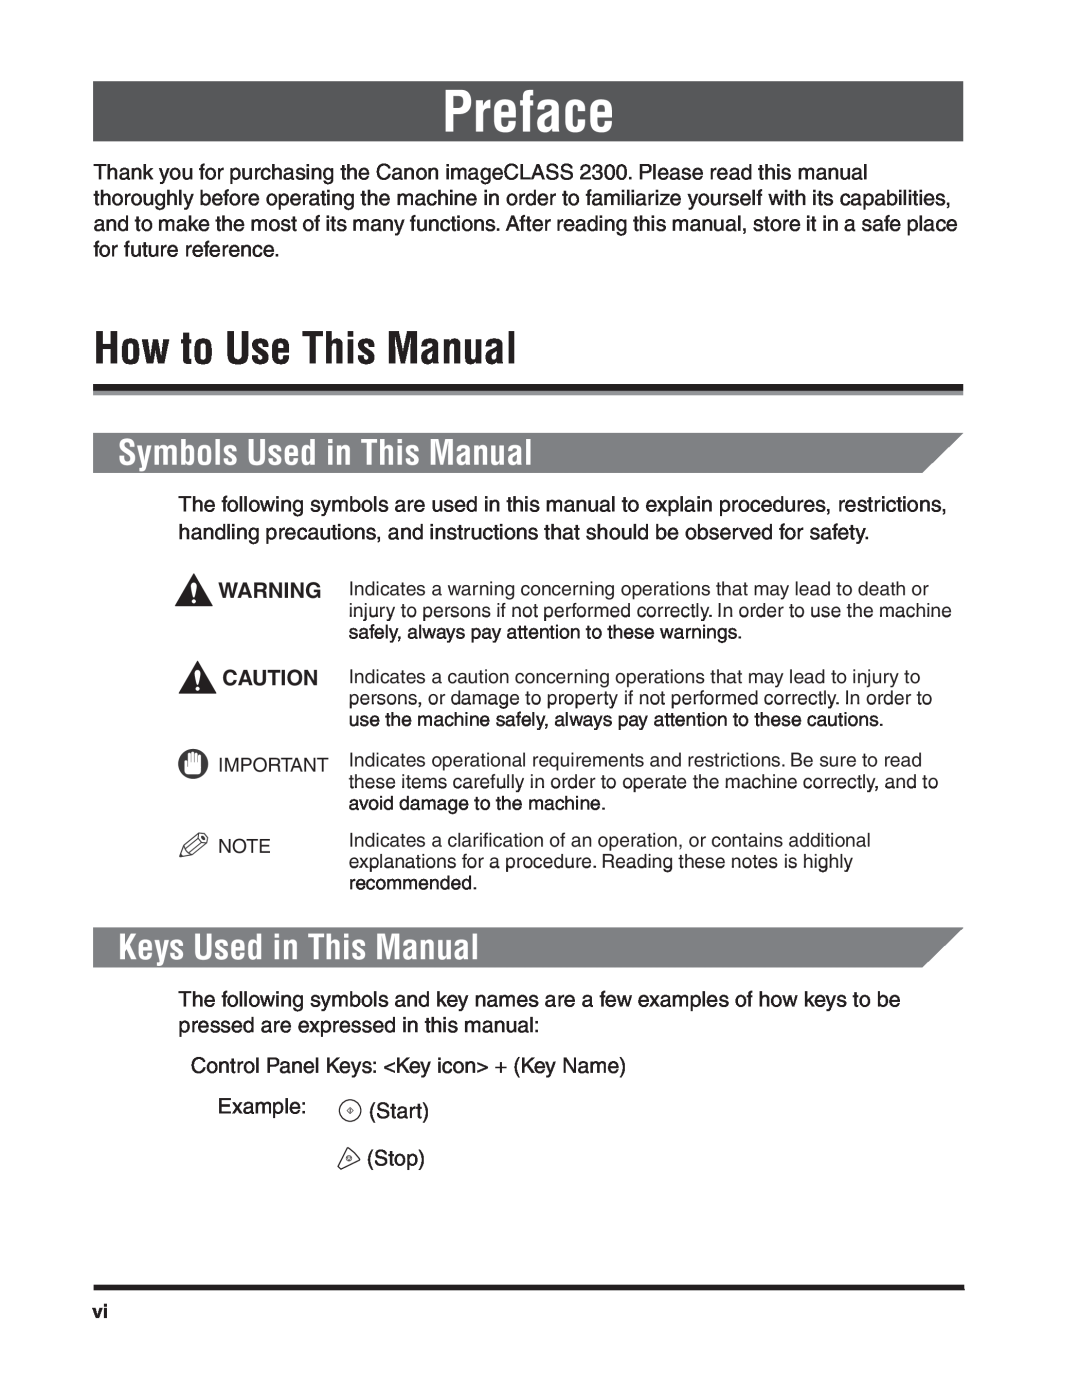 Canon 2300 manual How to Use This Manual, Symbols Used in This Manual, Keys Used in This Manual, Preface 